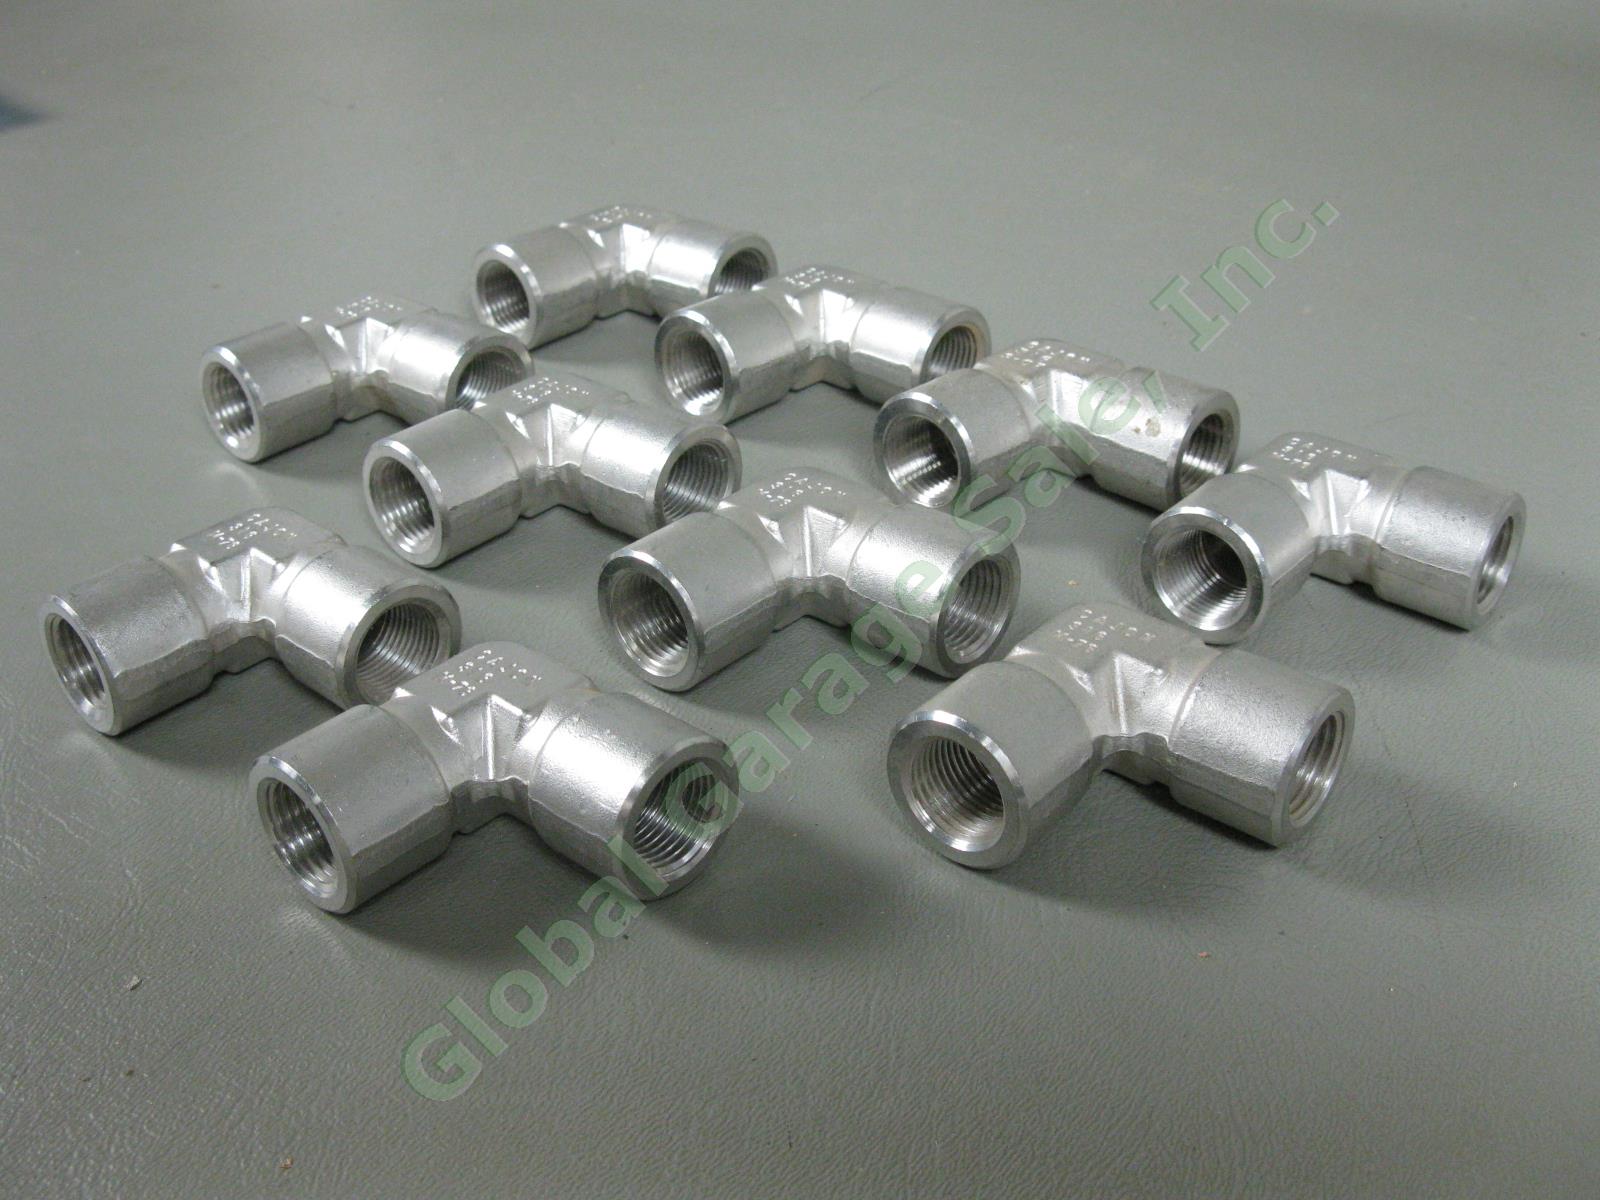 10 Cajun-316 3/8" Female 90° Degree Stainless Steel Elbow Lot SS M-76 Fitting NR 2